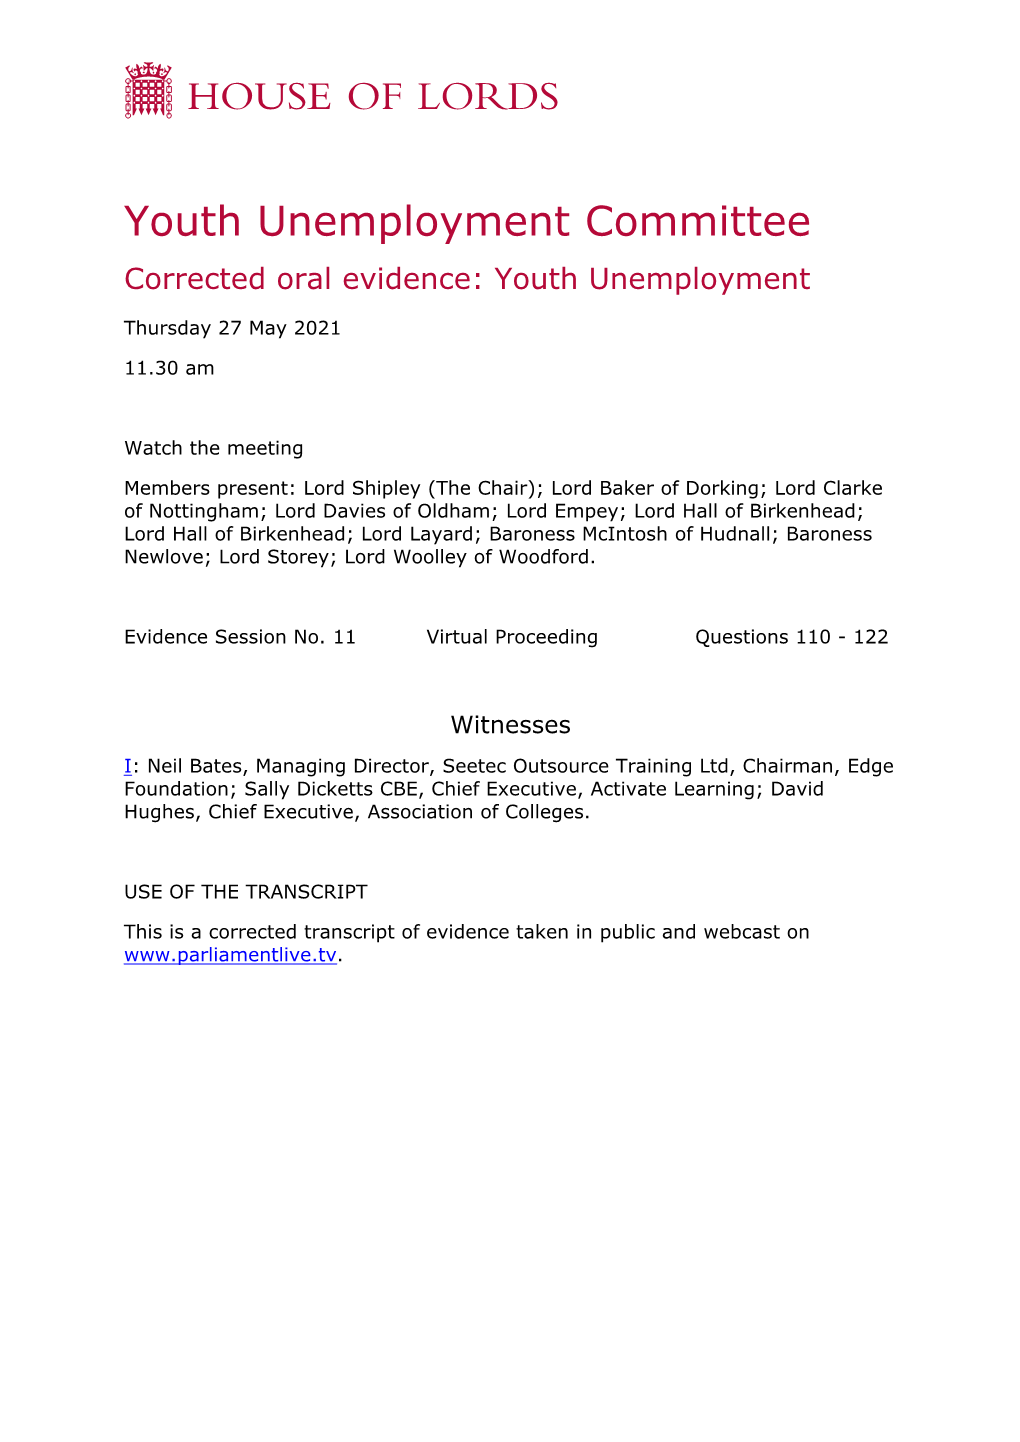 Youth Unemployment Committee Corrected Oral Evidence: Youth Unemployment